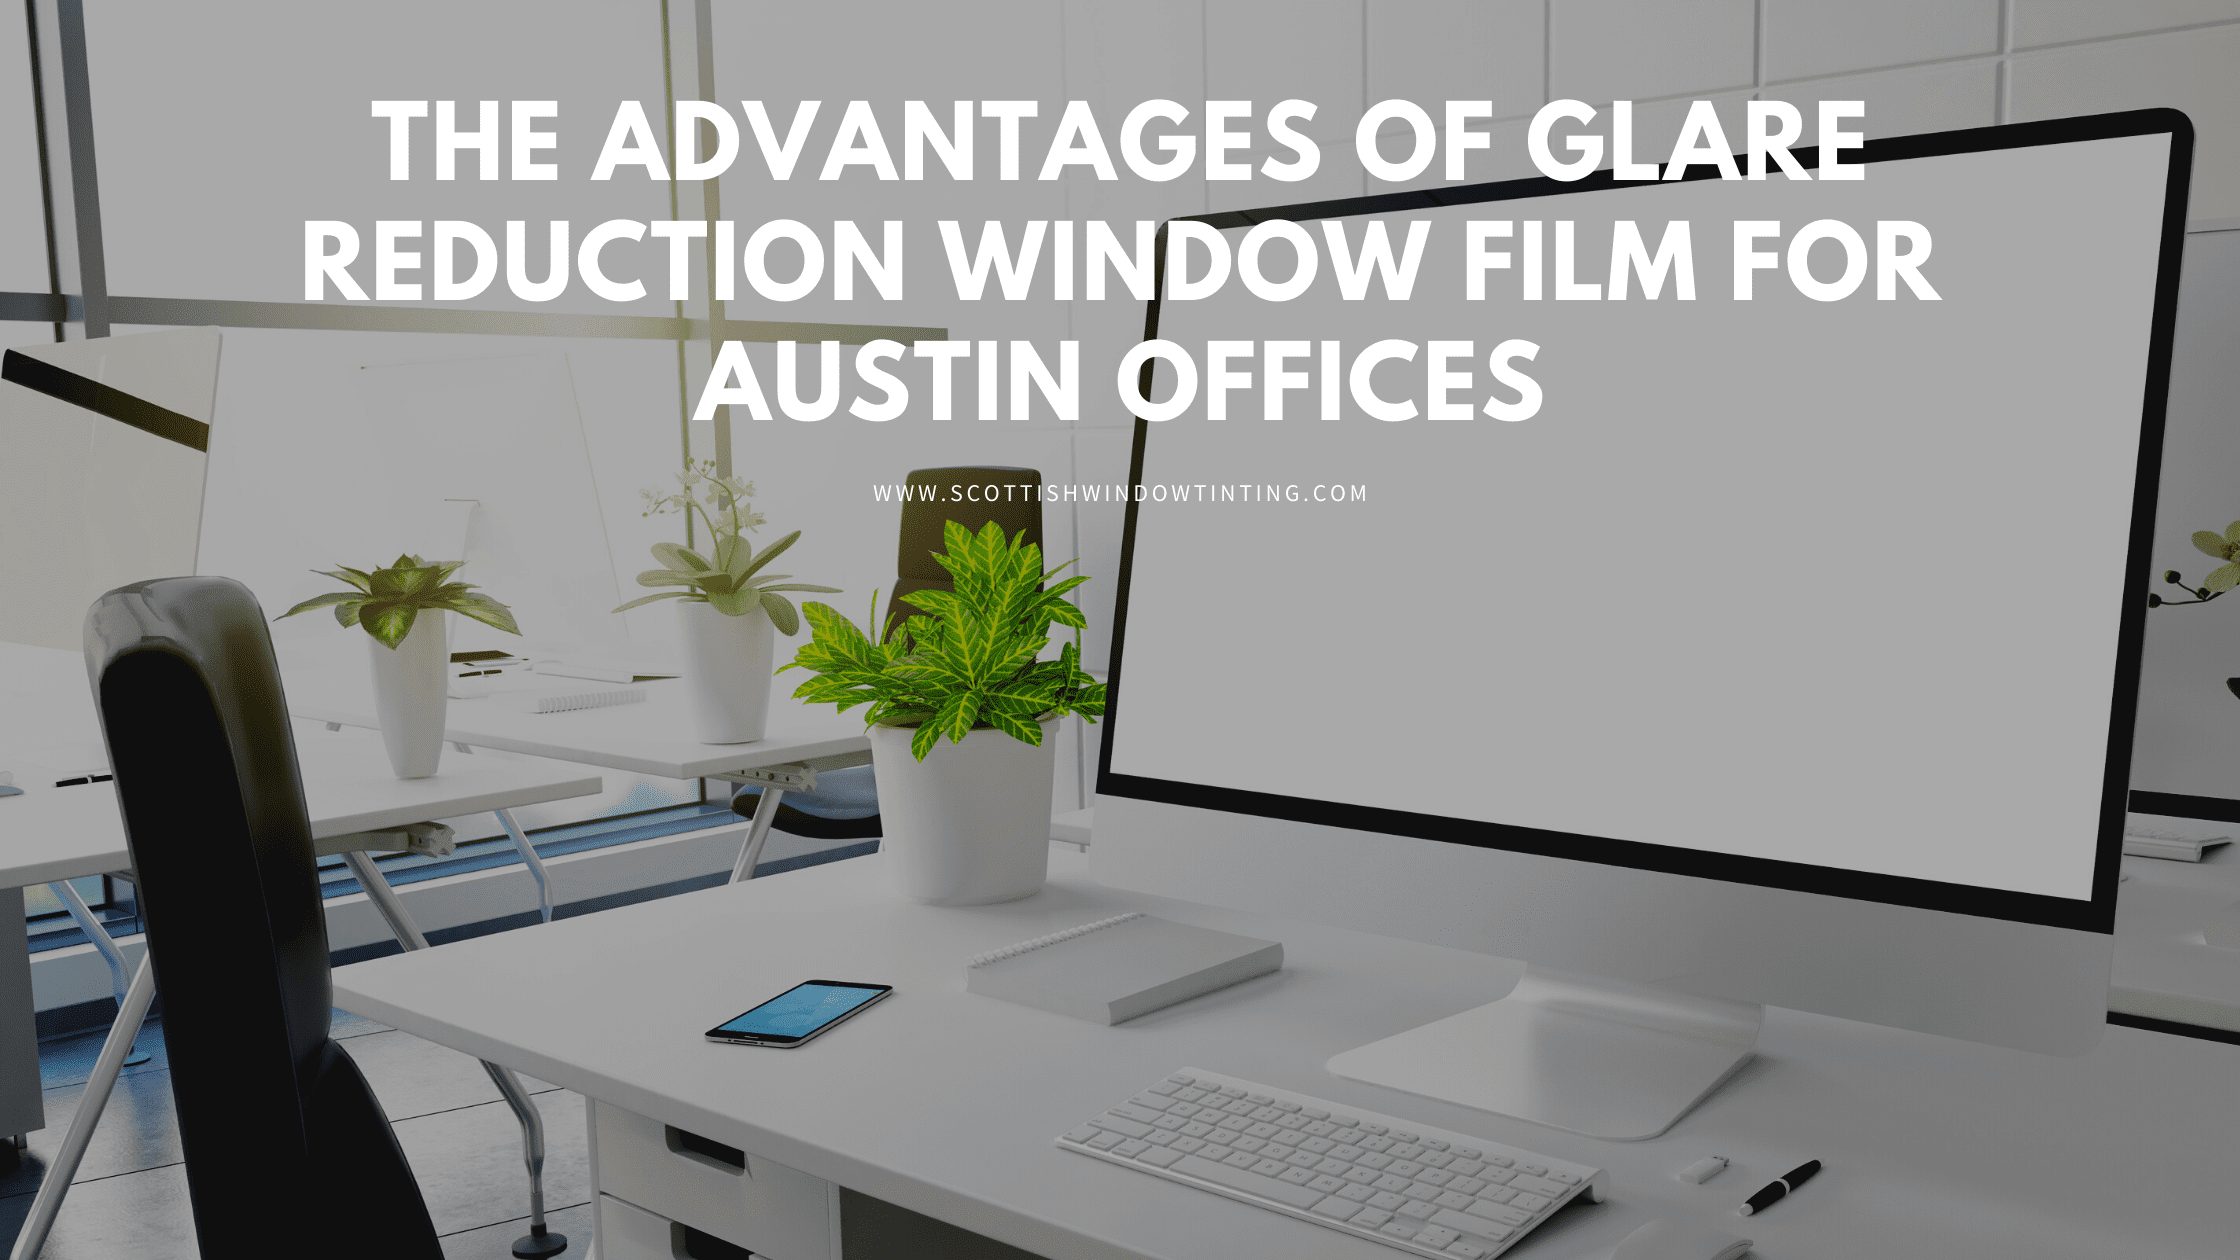 The Advantages of Glare Reduction Window Film for Austin Offices